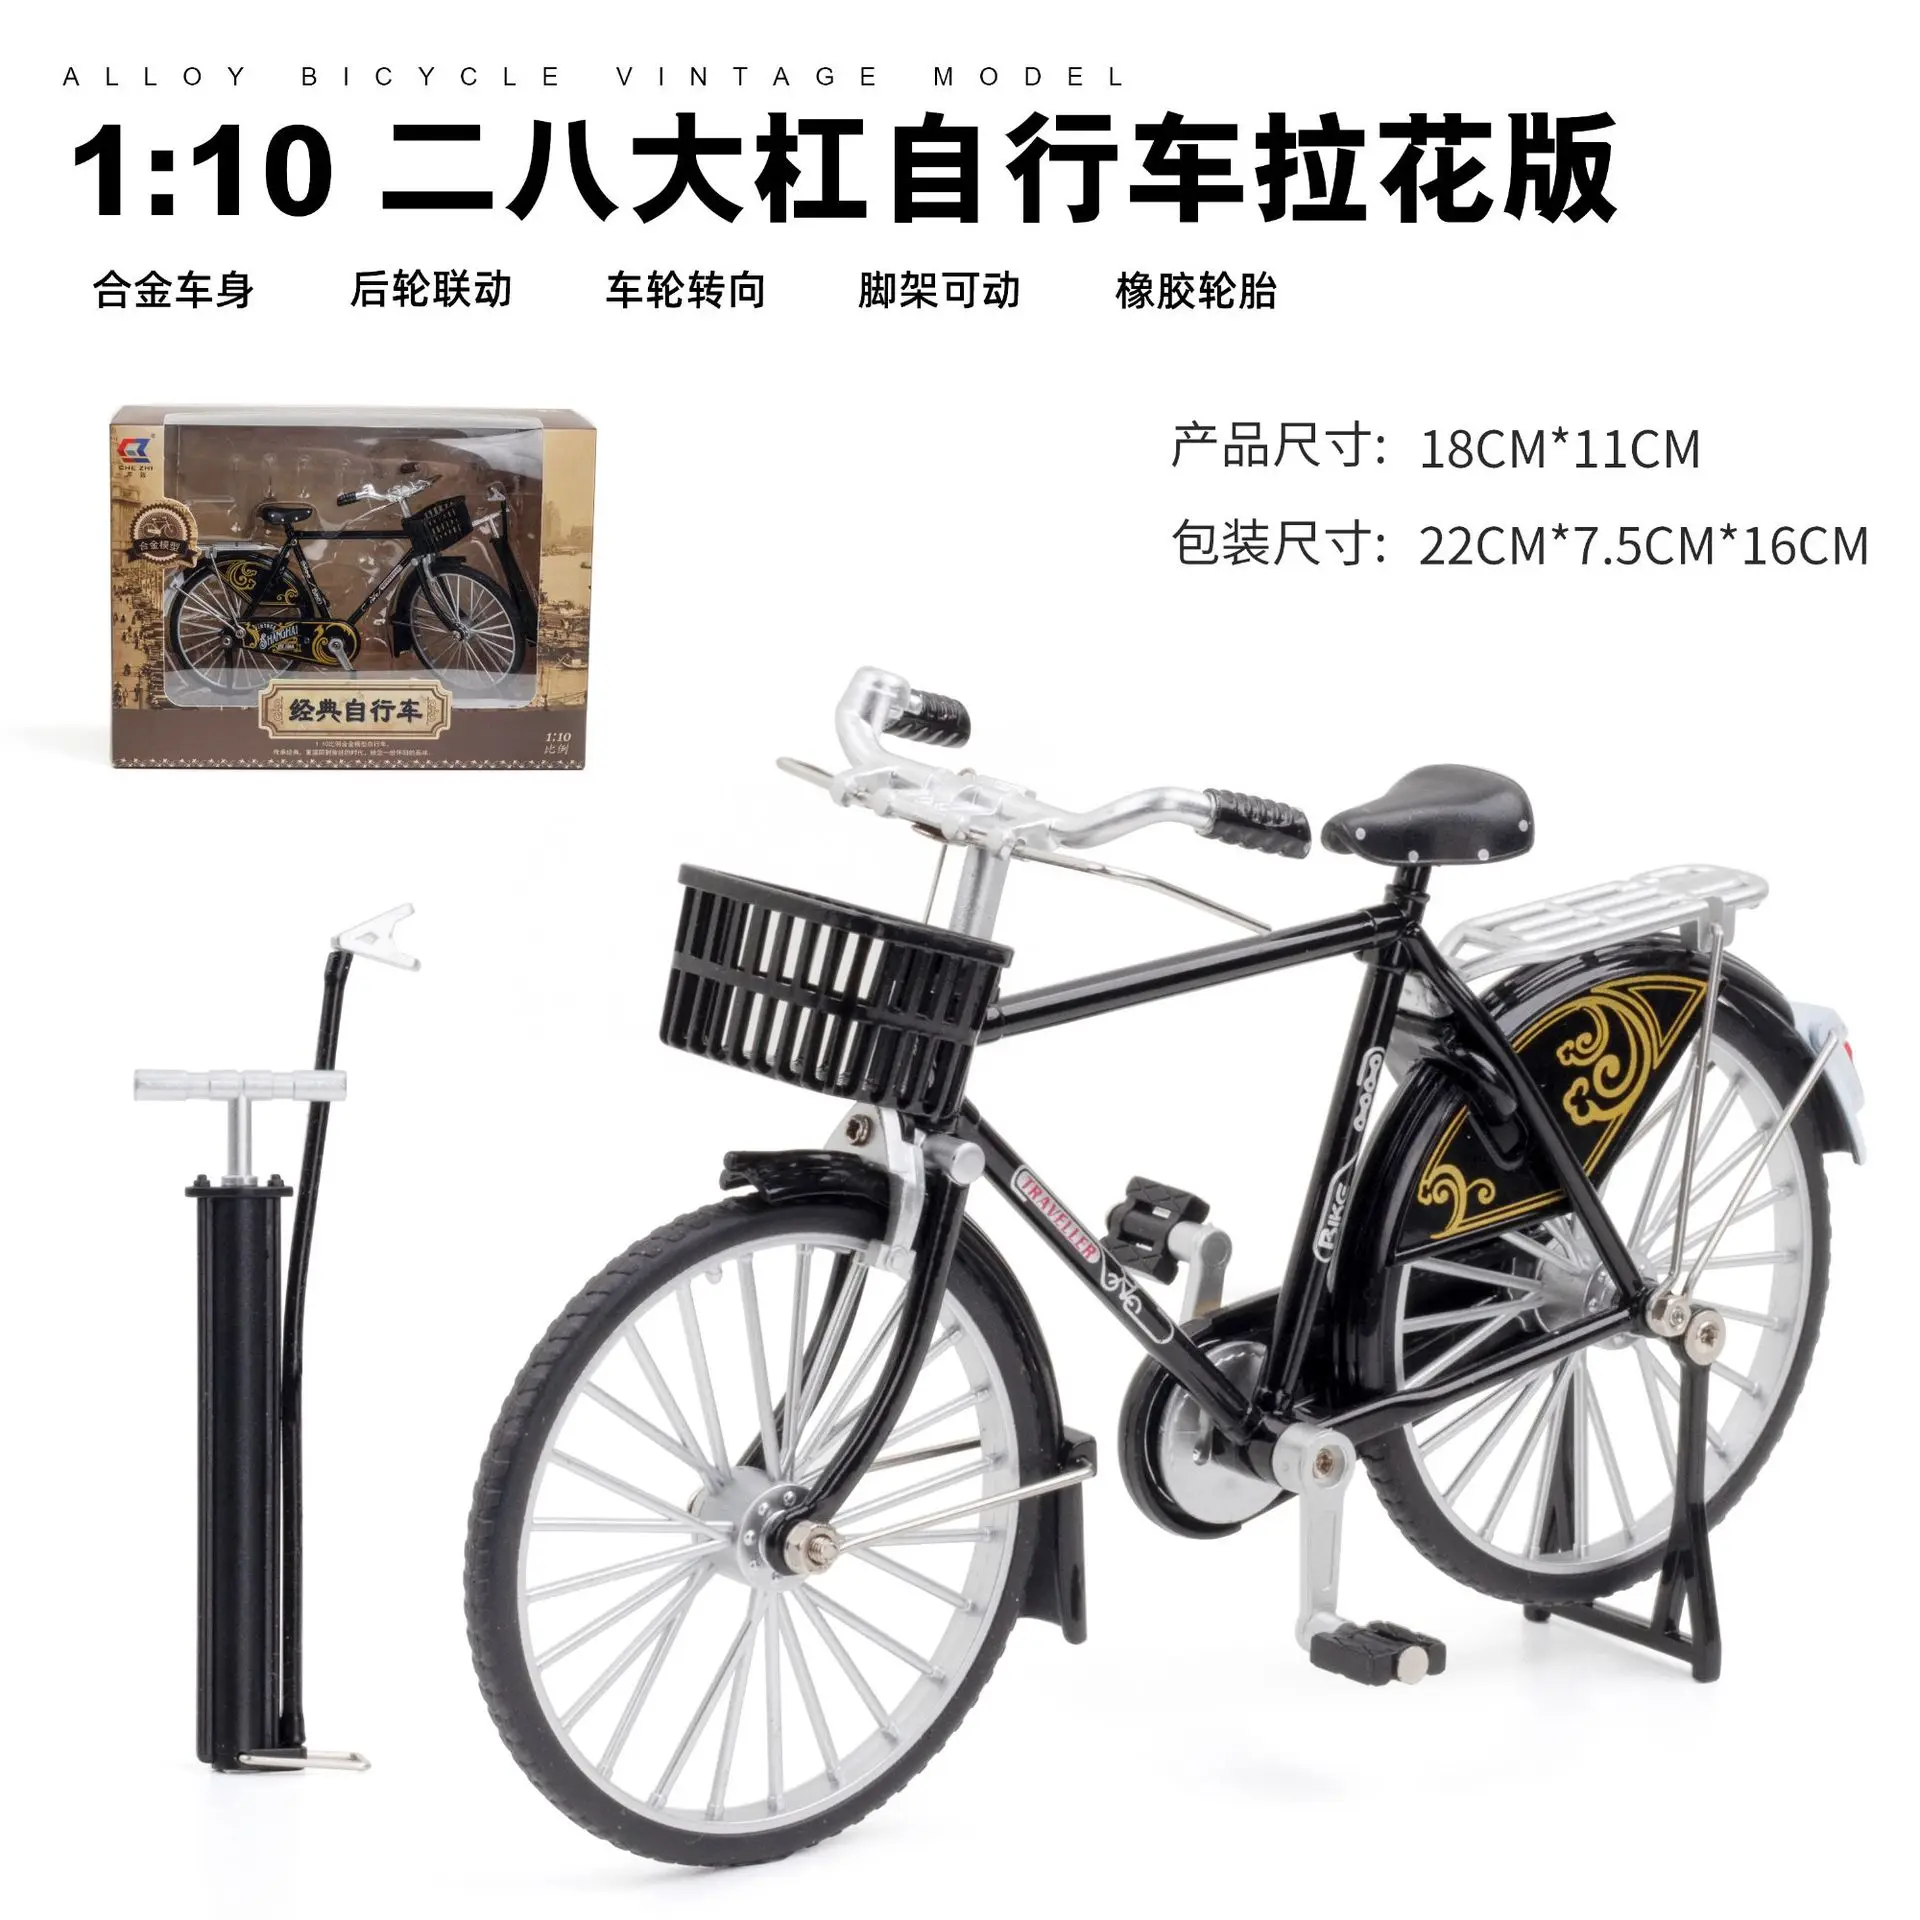 

1:10 Mini Retro Fingertip Mountain Bicycle Nostalgic Model Toy Mini Bike Adult Simulation Collection Gifts Toys for children